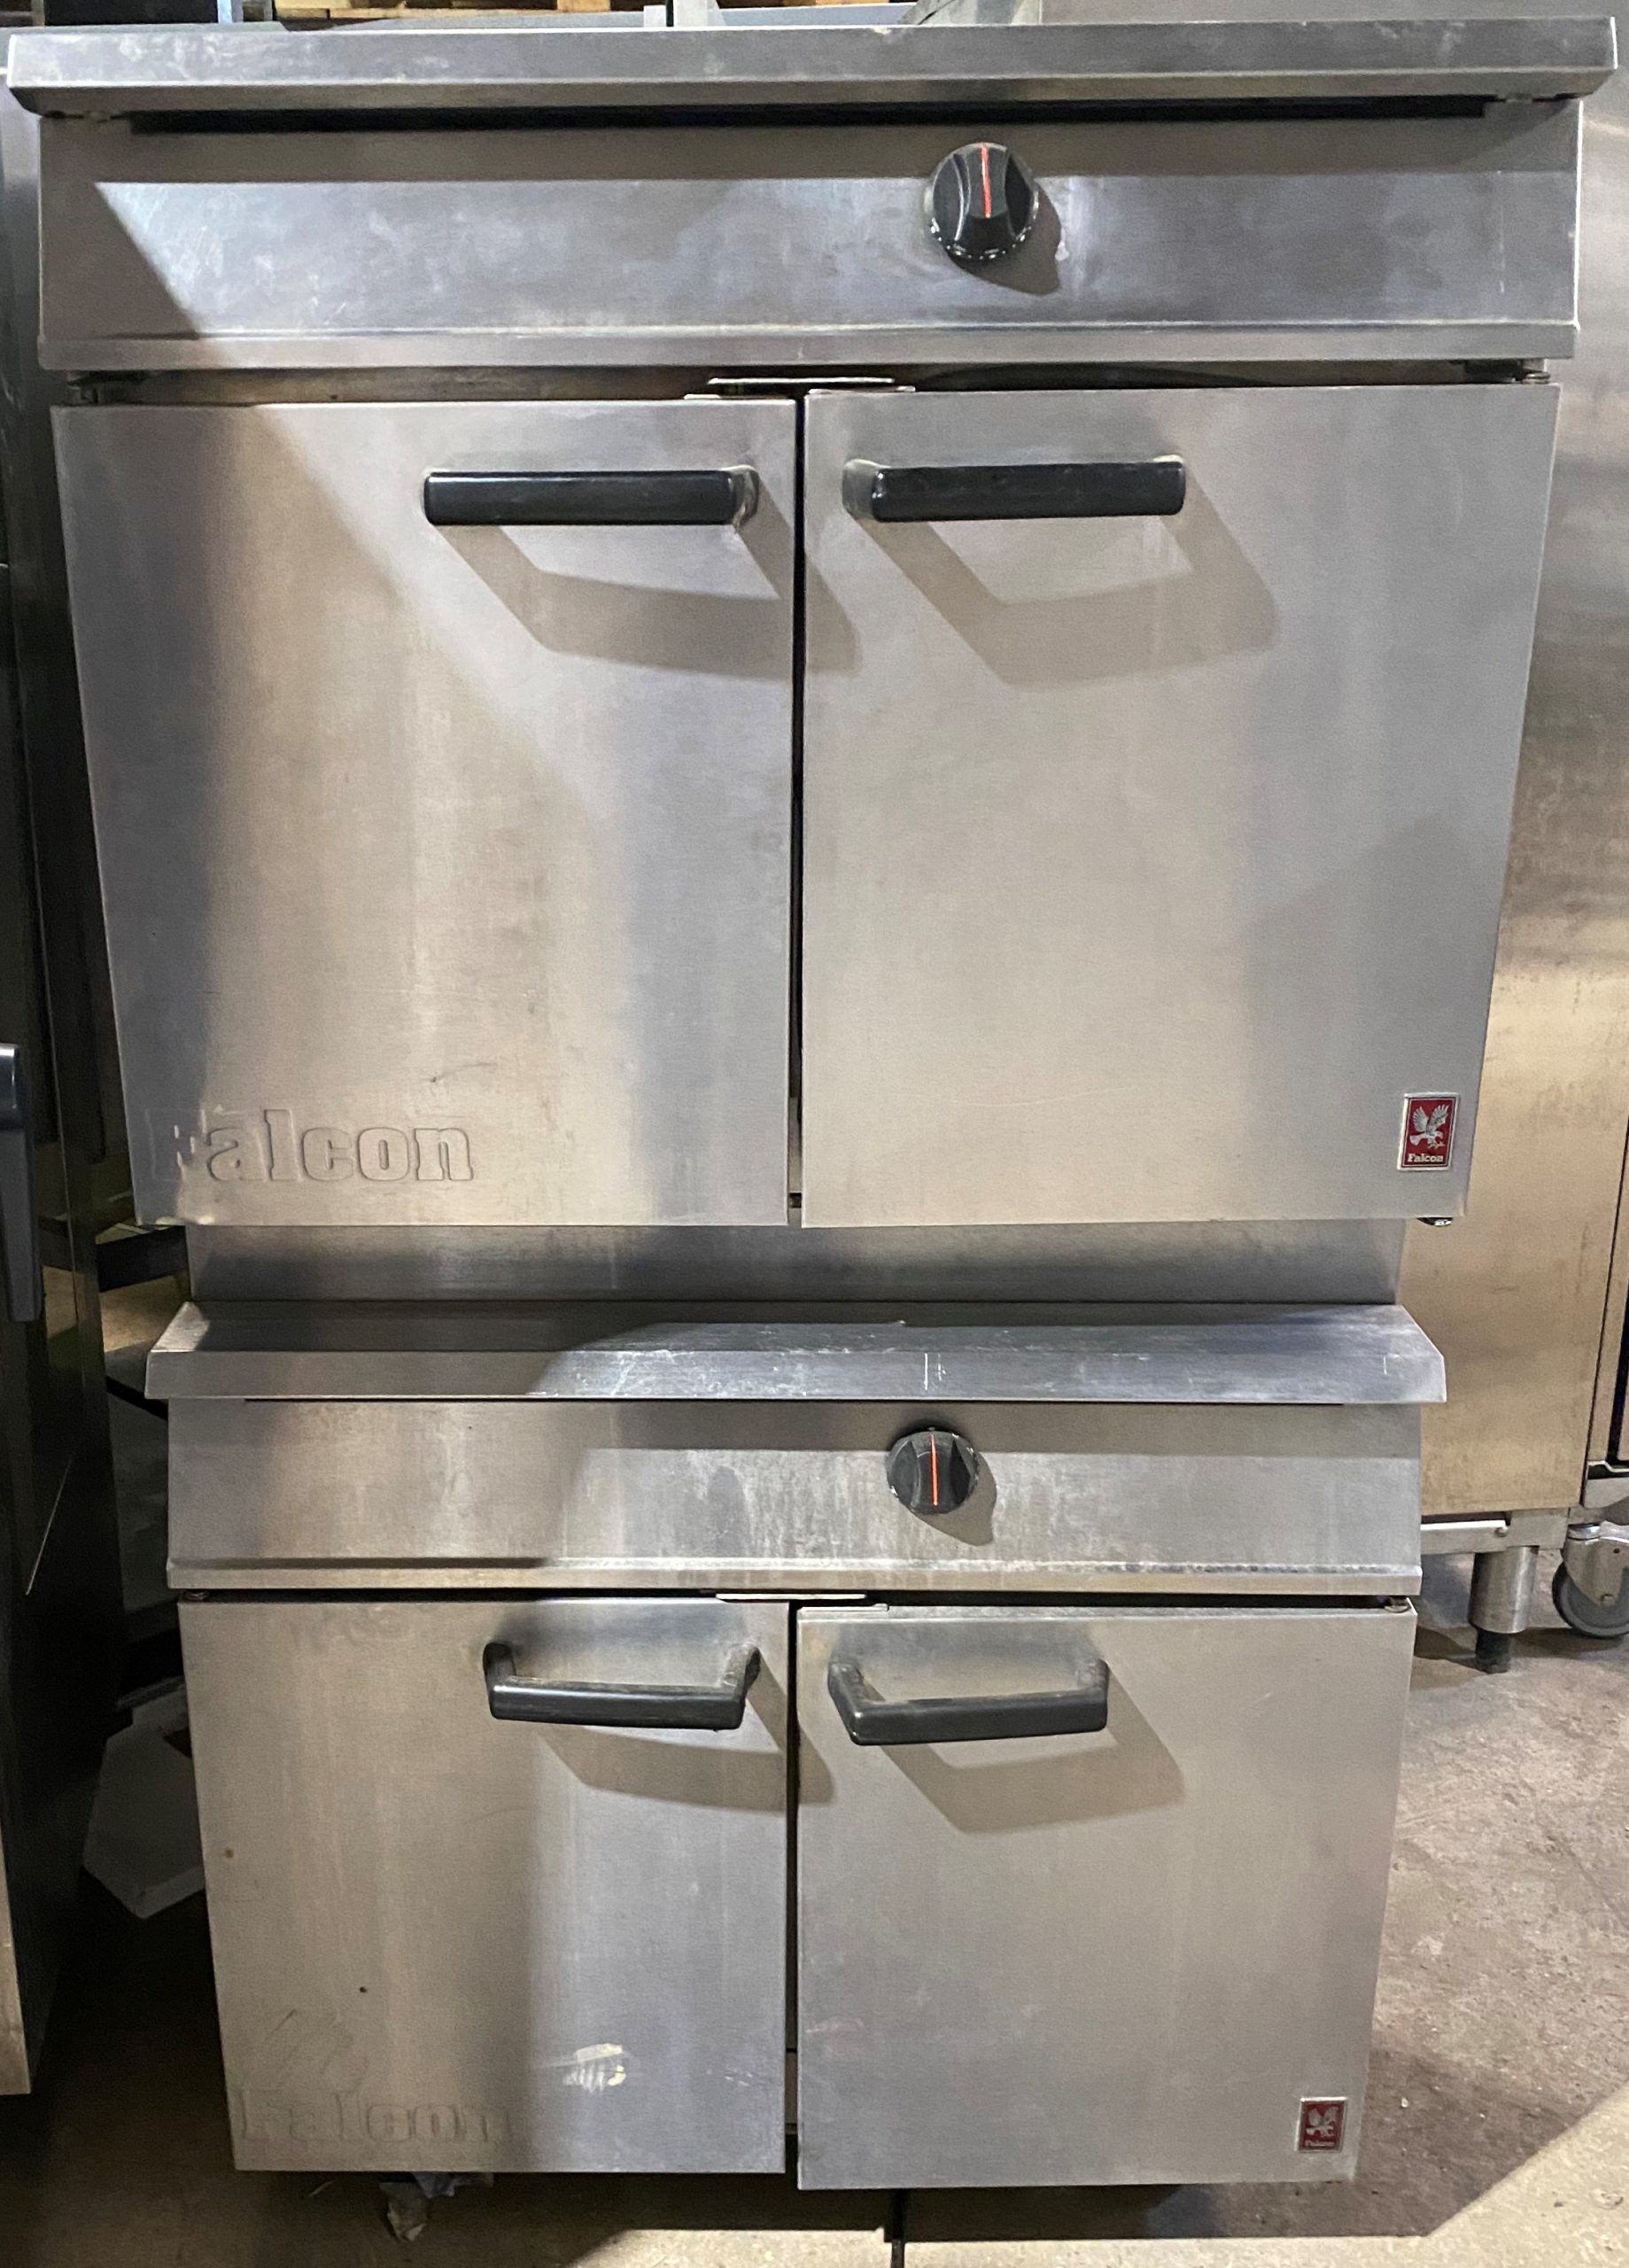 Falcon stacked ovens